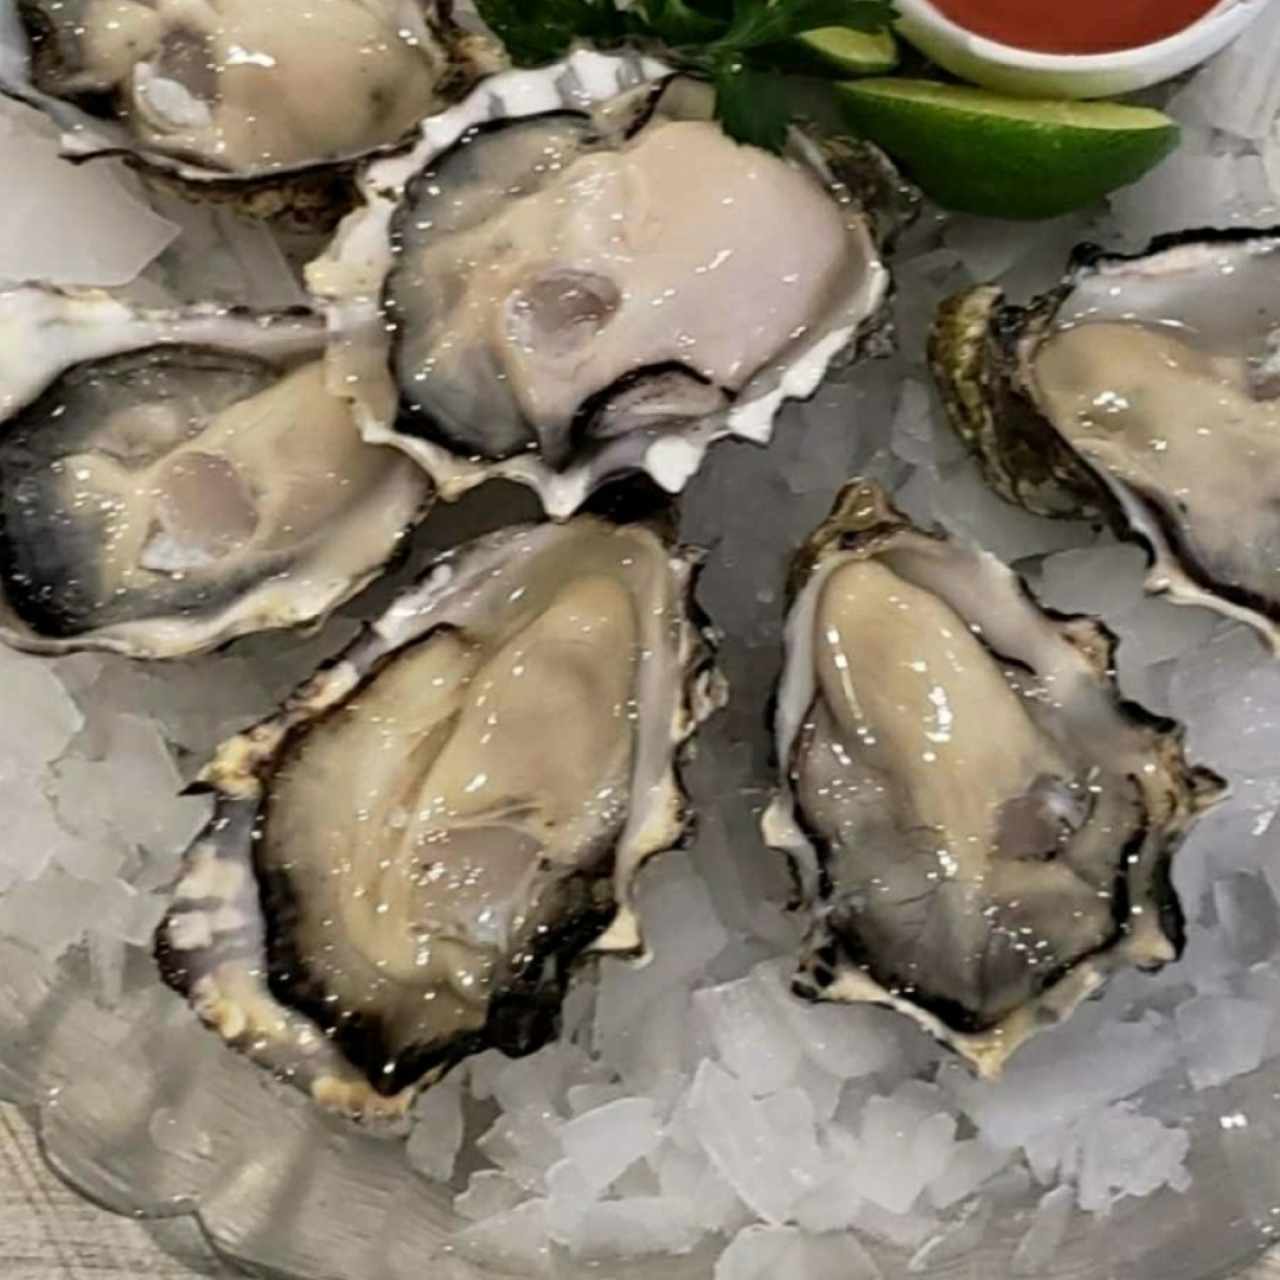 Pacific Oyster 